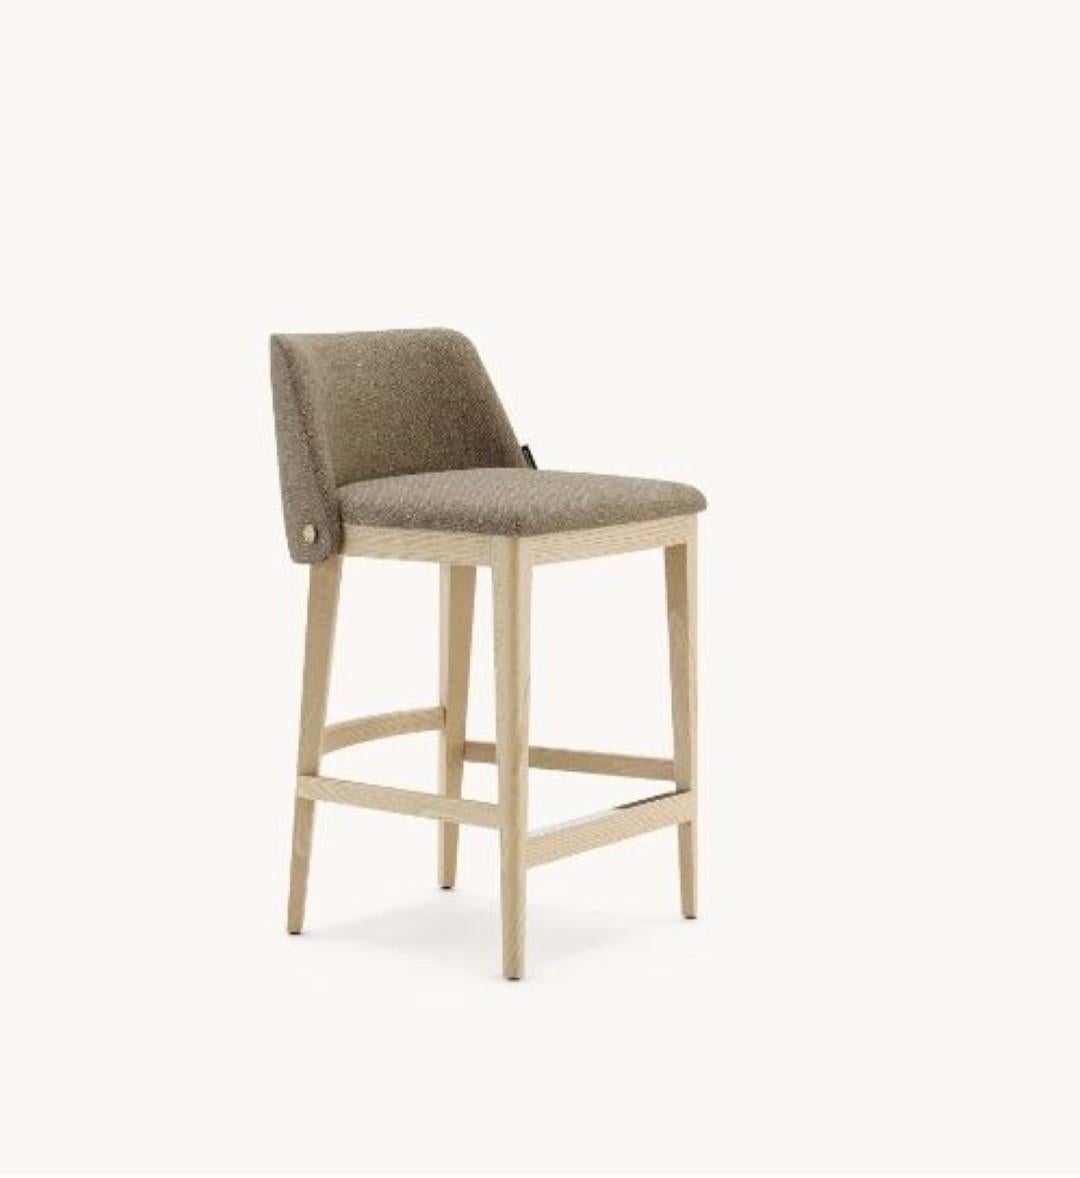 Louise counter chair by Domkapa
Materials: Fiber, Natural Ash, Steel. 
Dimensions: W 51 x D 50 x H 83 cm. 
Also available in different materials. Please contact us.

Designed to make a statement, Camille bar and counter chairs are the perfect